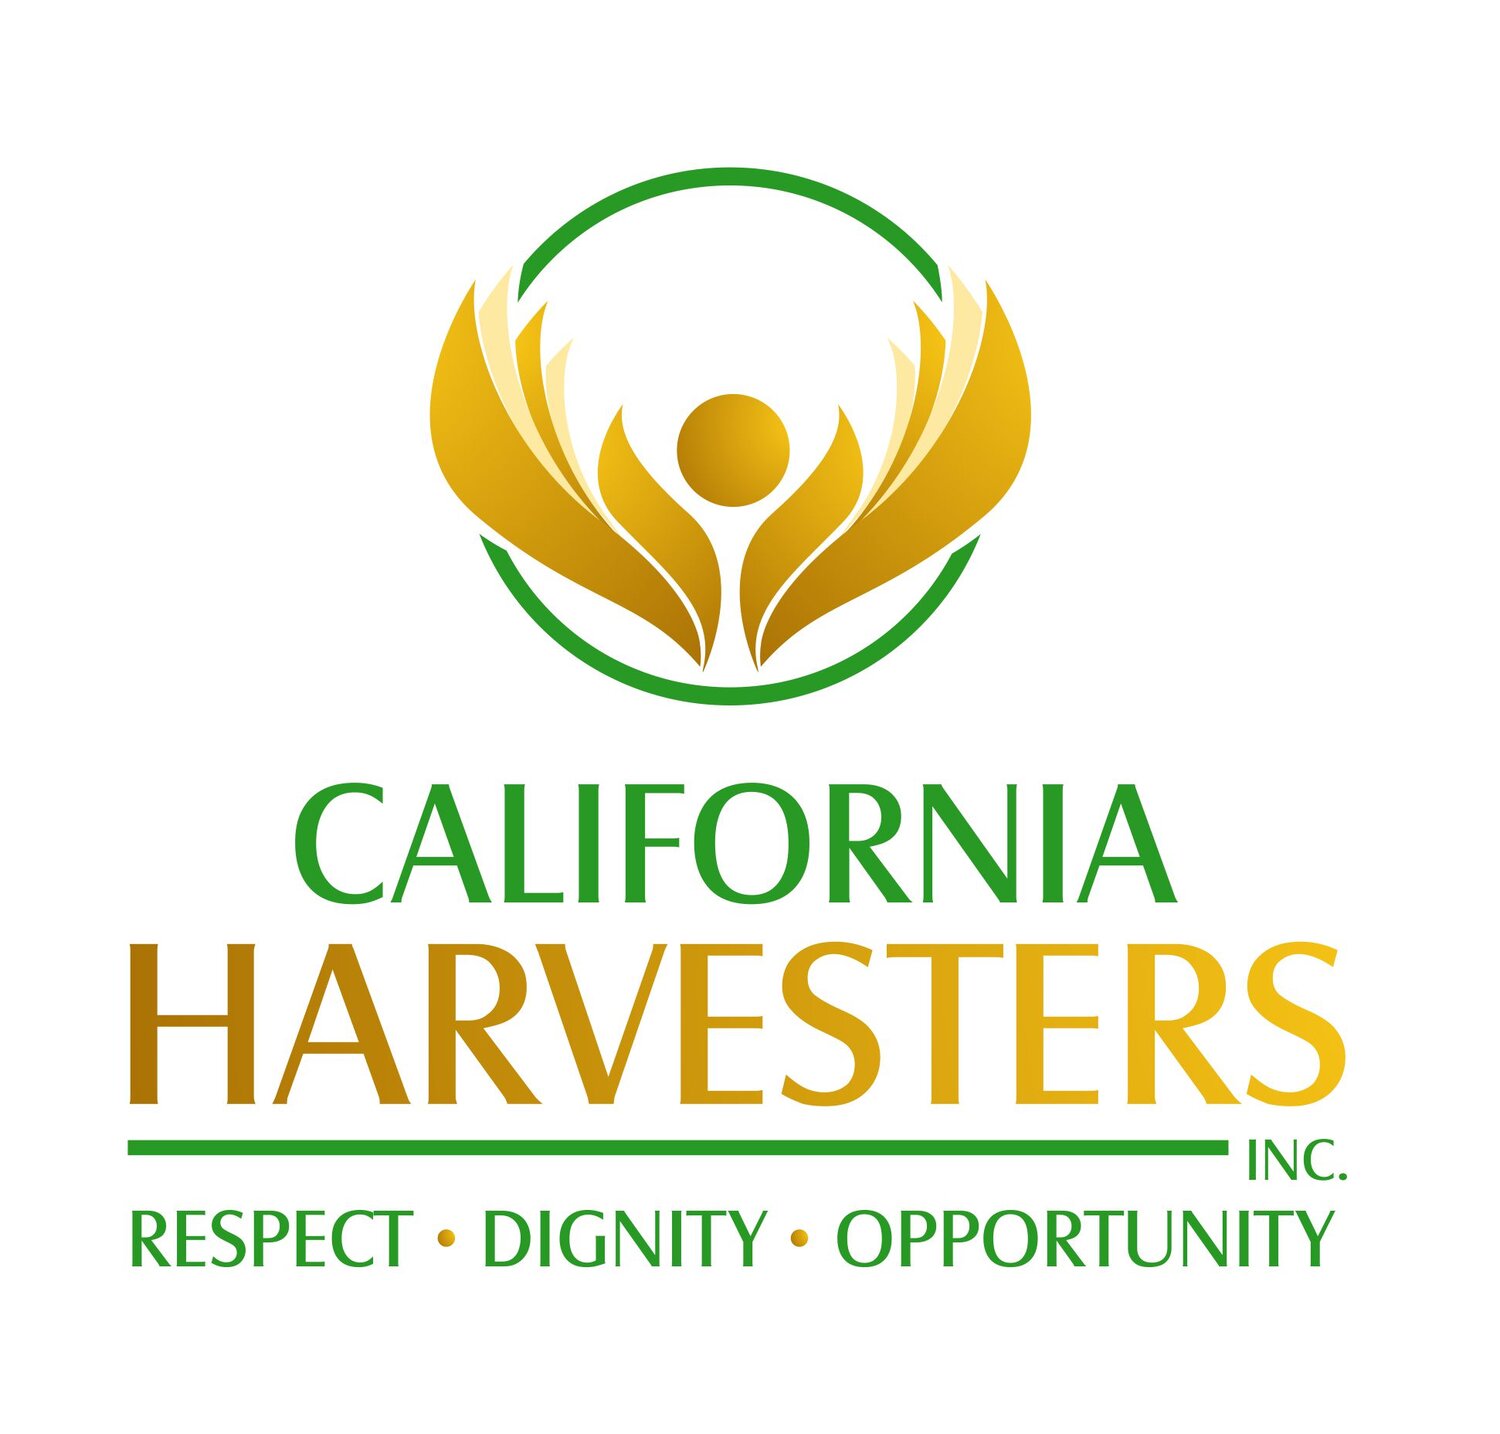 California Harvesters, Inc. | Good for Growers, Good for Workers